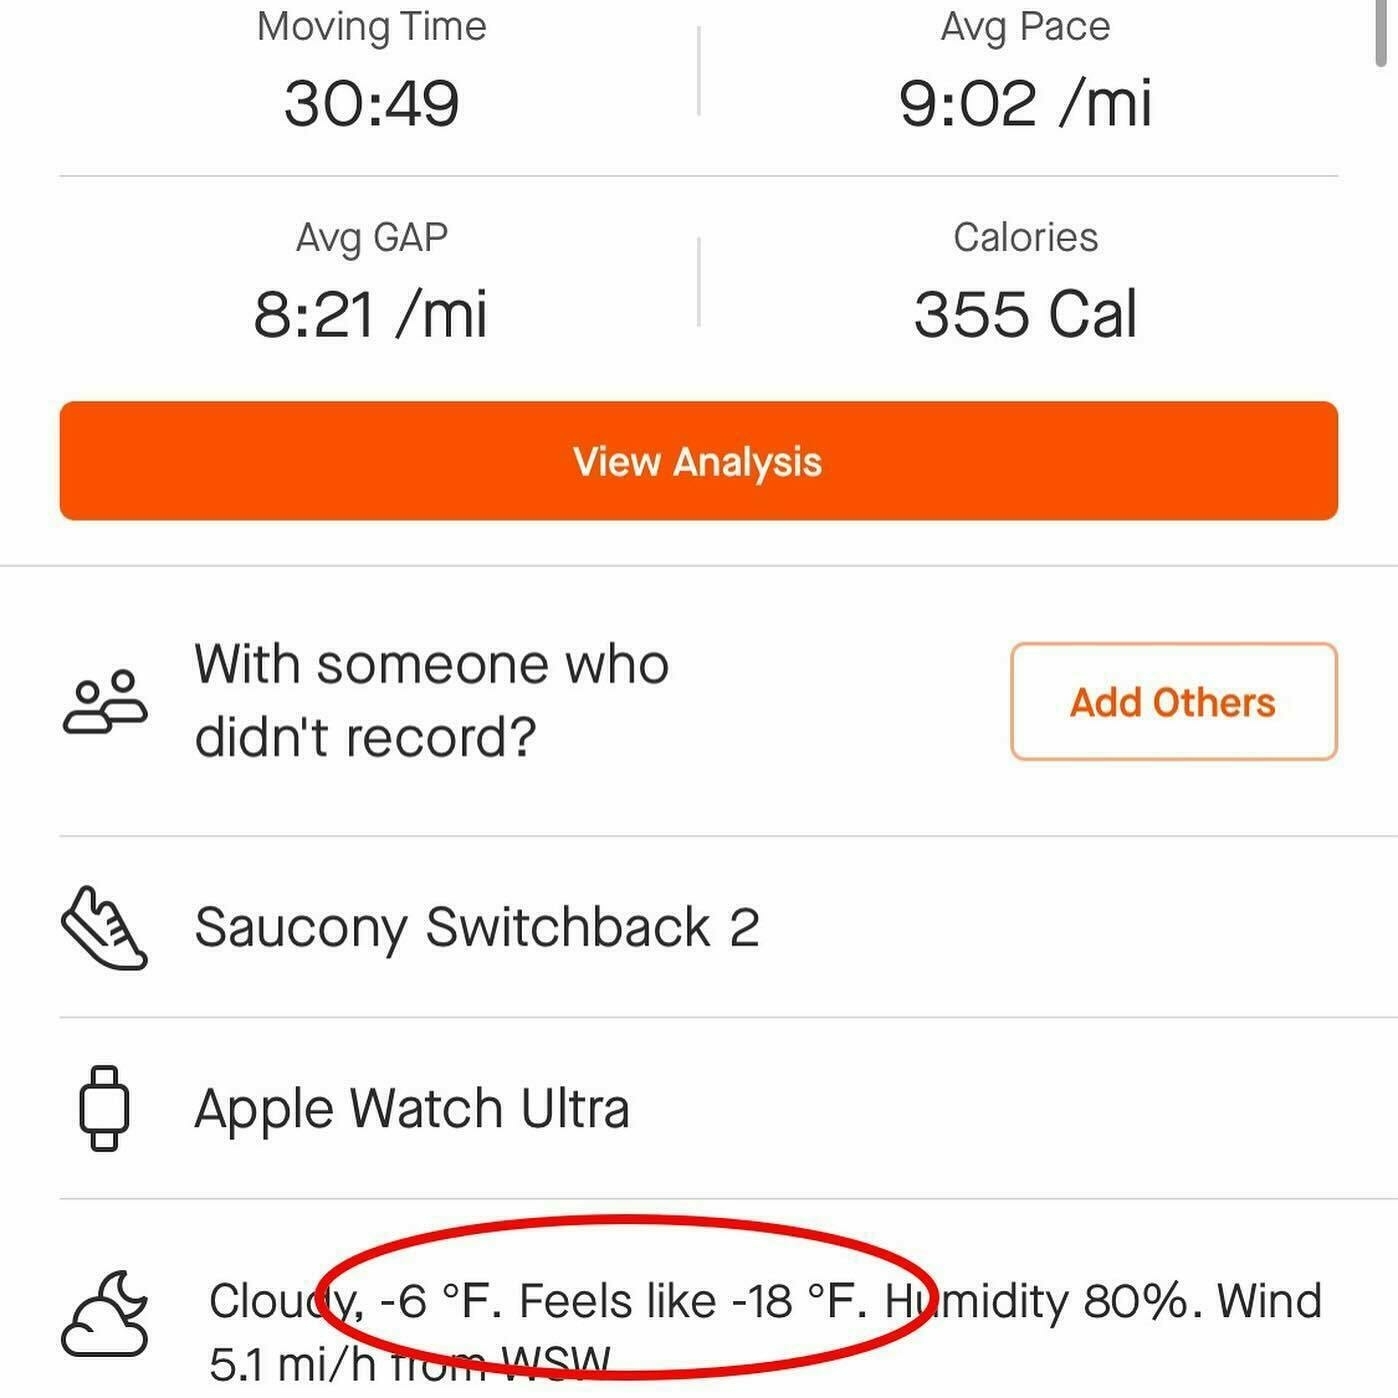 This is a screenshot of a fitness tracking app, displaying exercise stats such as Moving Time, Avg Pace, Calories, and weather conditions highlighted as &ldquo;-6°F, Feels like -18°F. Humidity 80%. Wind 5.1 mi/h from WSW.&quot;